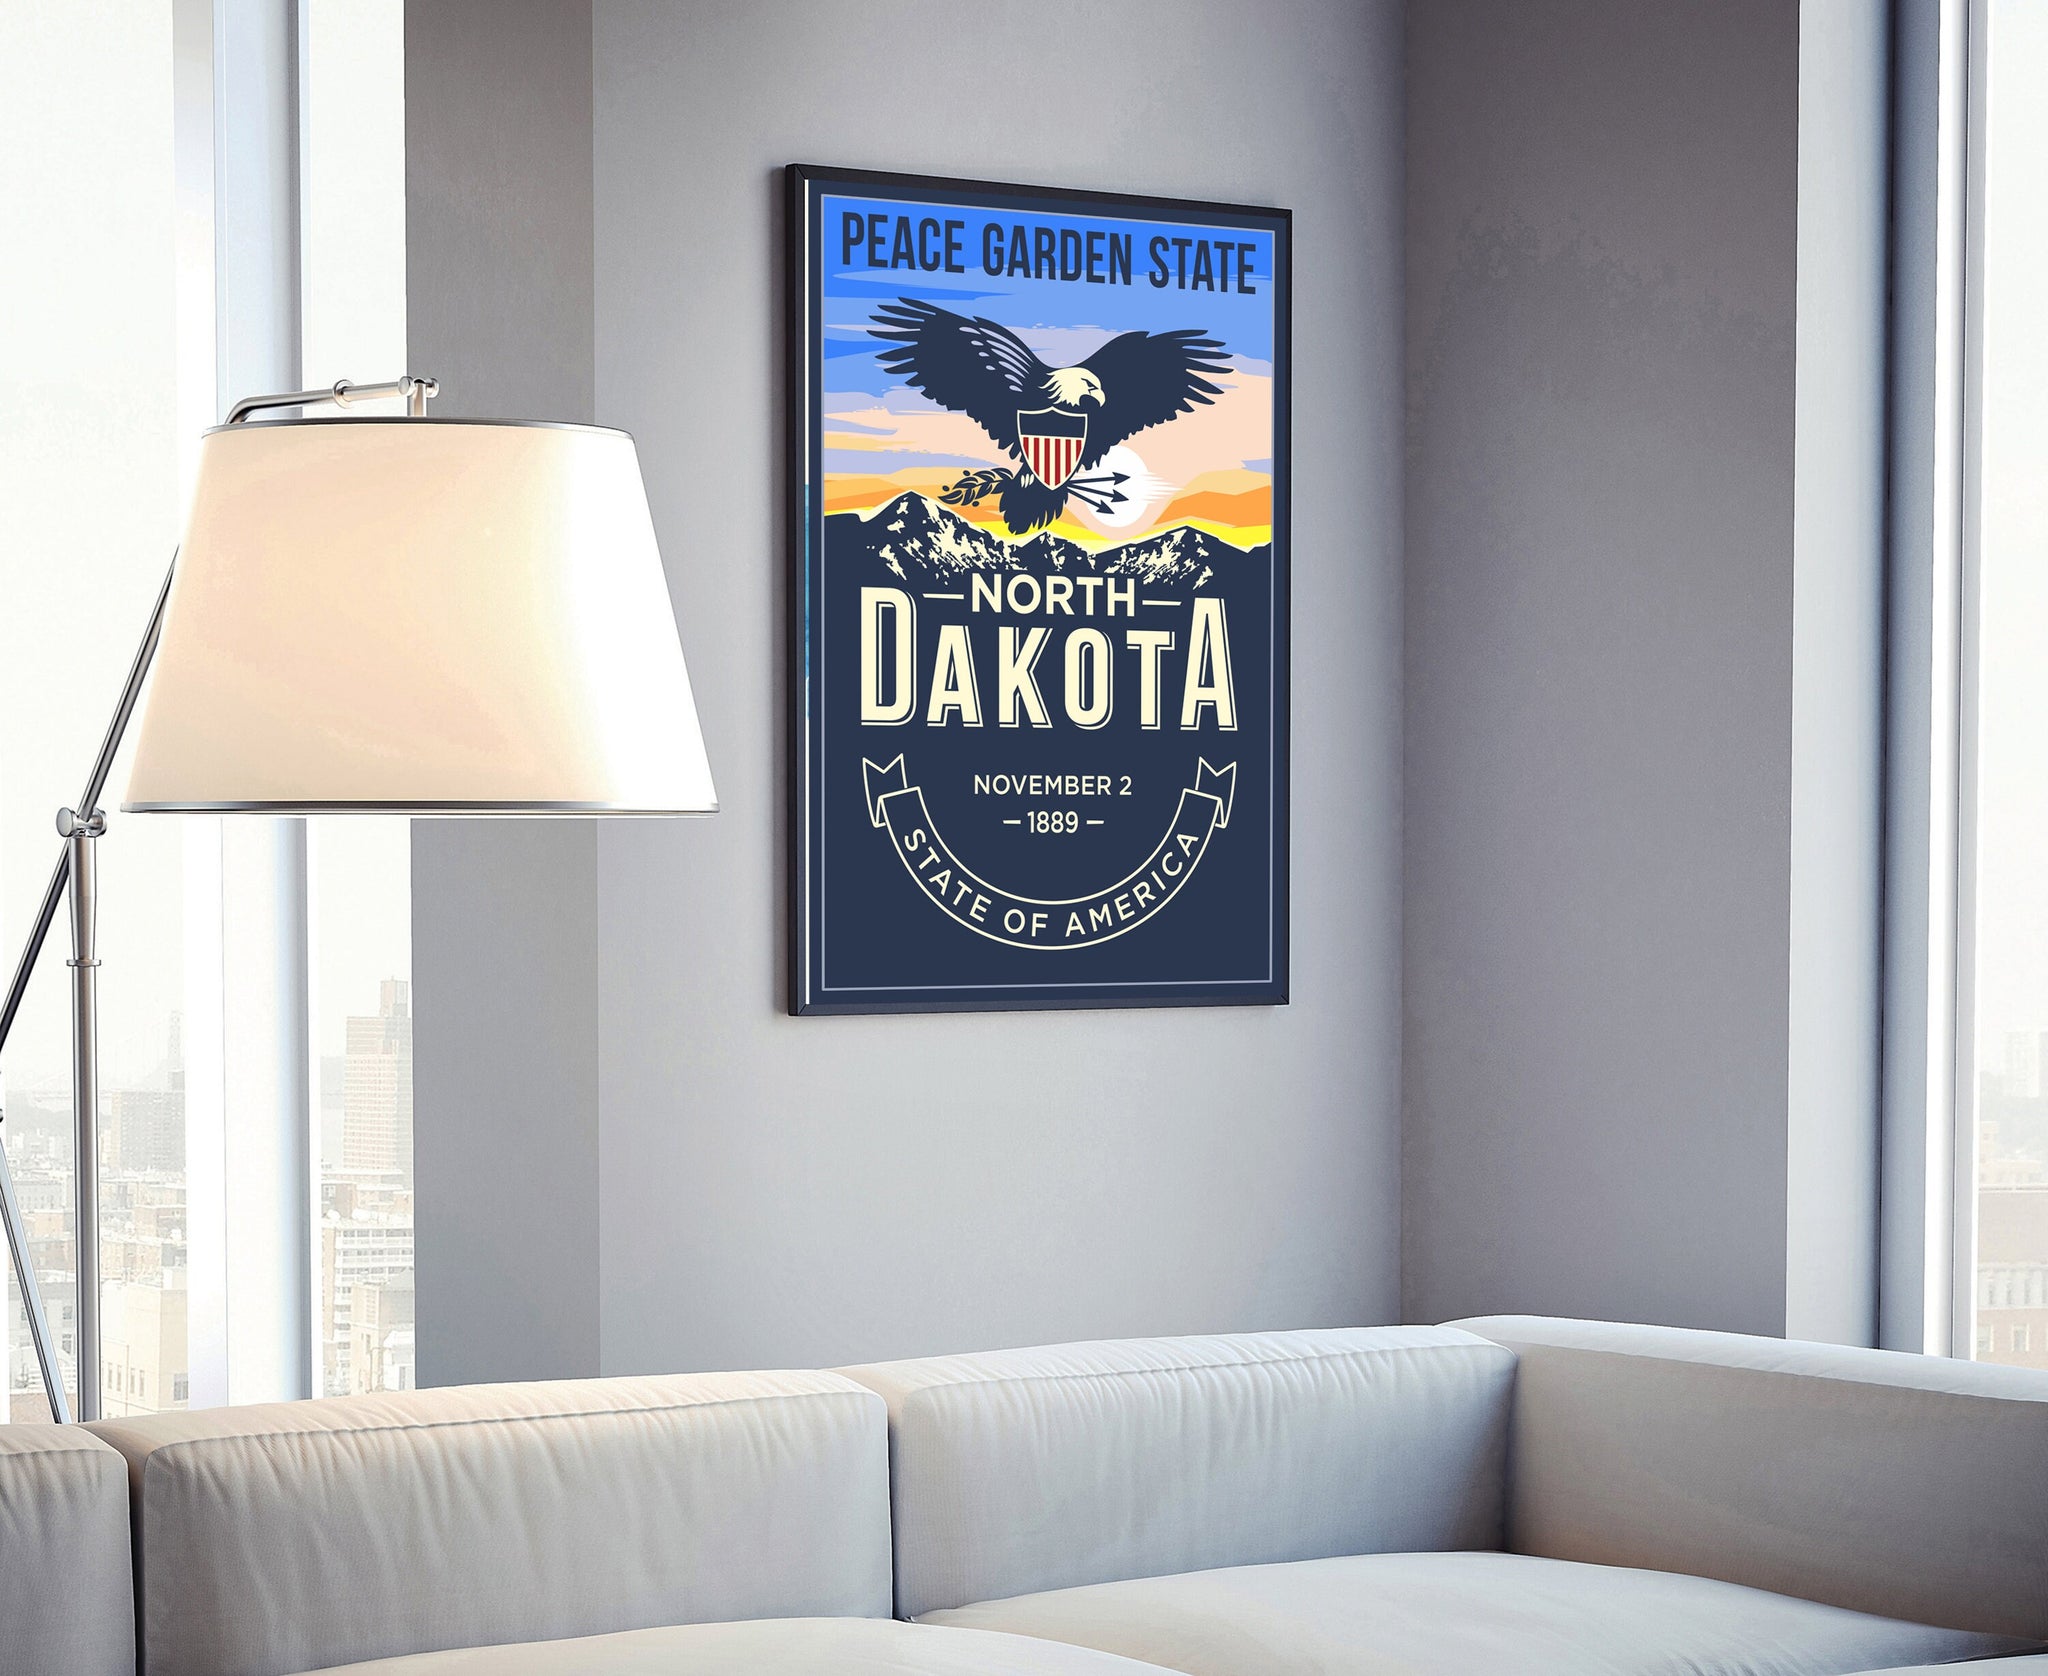 United States Poster, North Dakota State Poster Print, North Dakota State Emblem Poster, Retro Travel State Poster, Home Office Wall Art